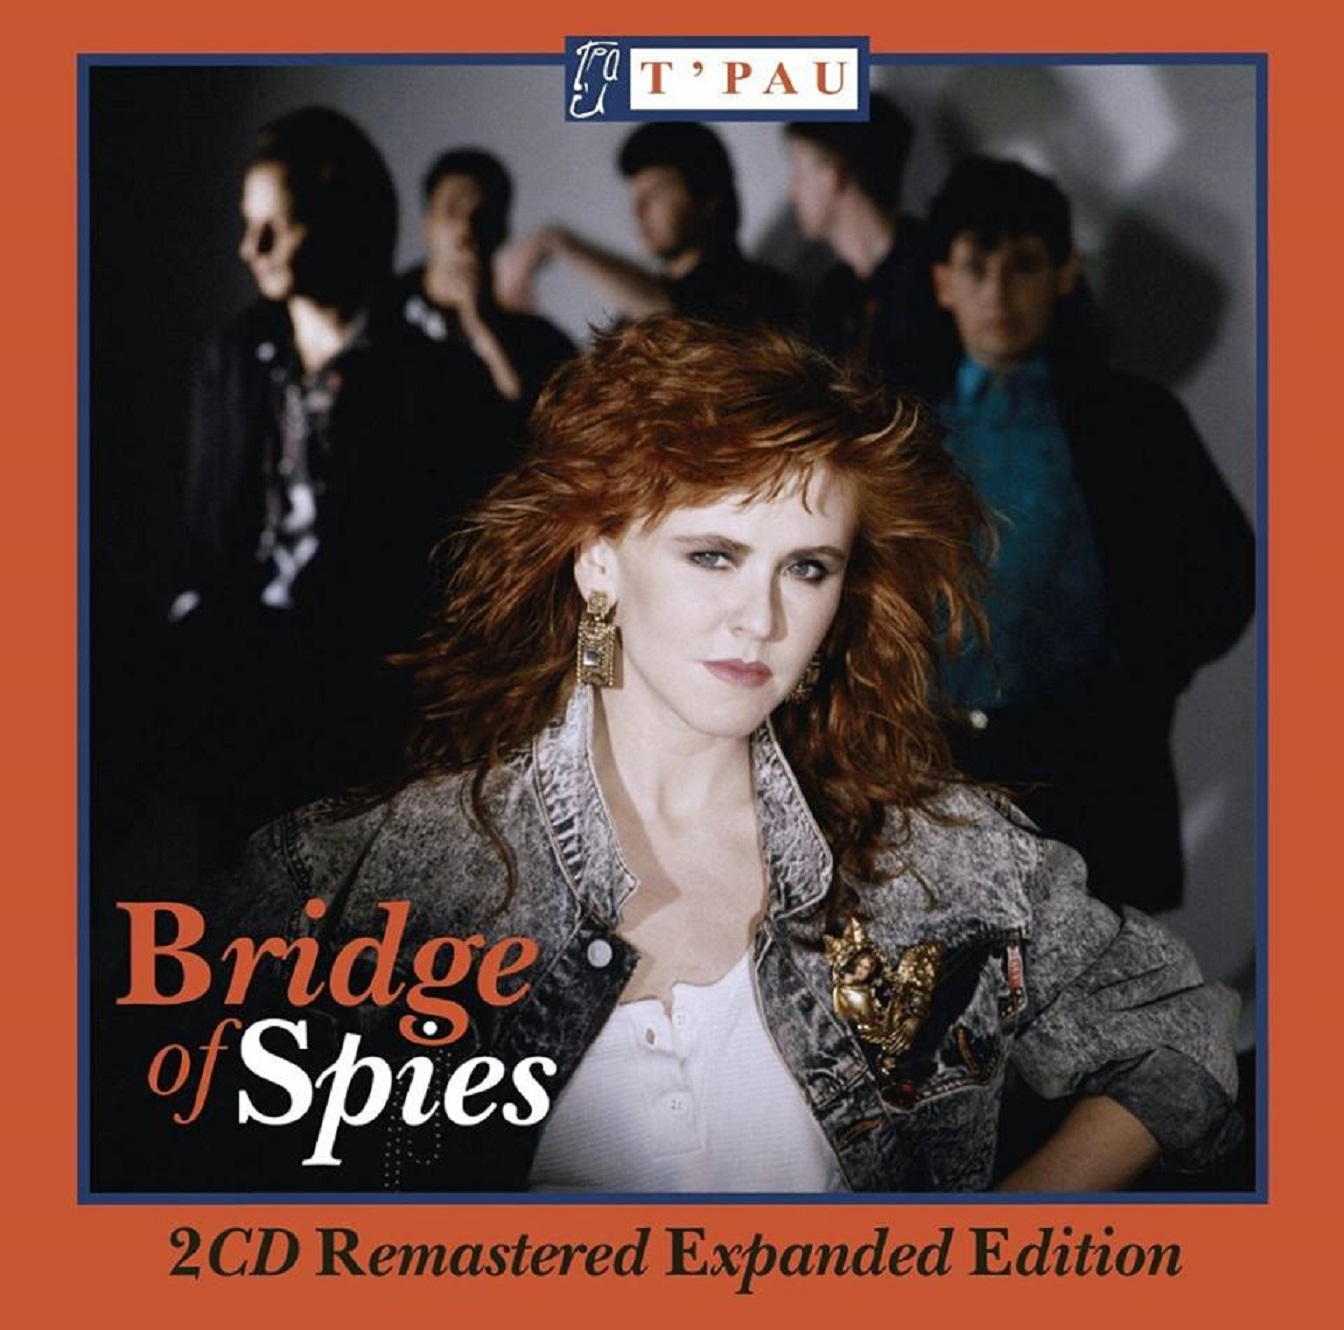 Bridge of Spies 2 CD Remastered/Expanded